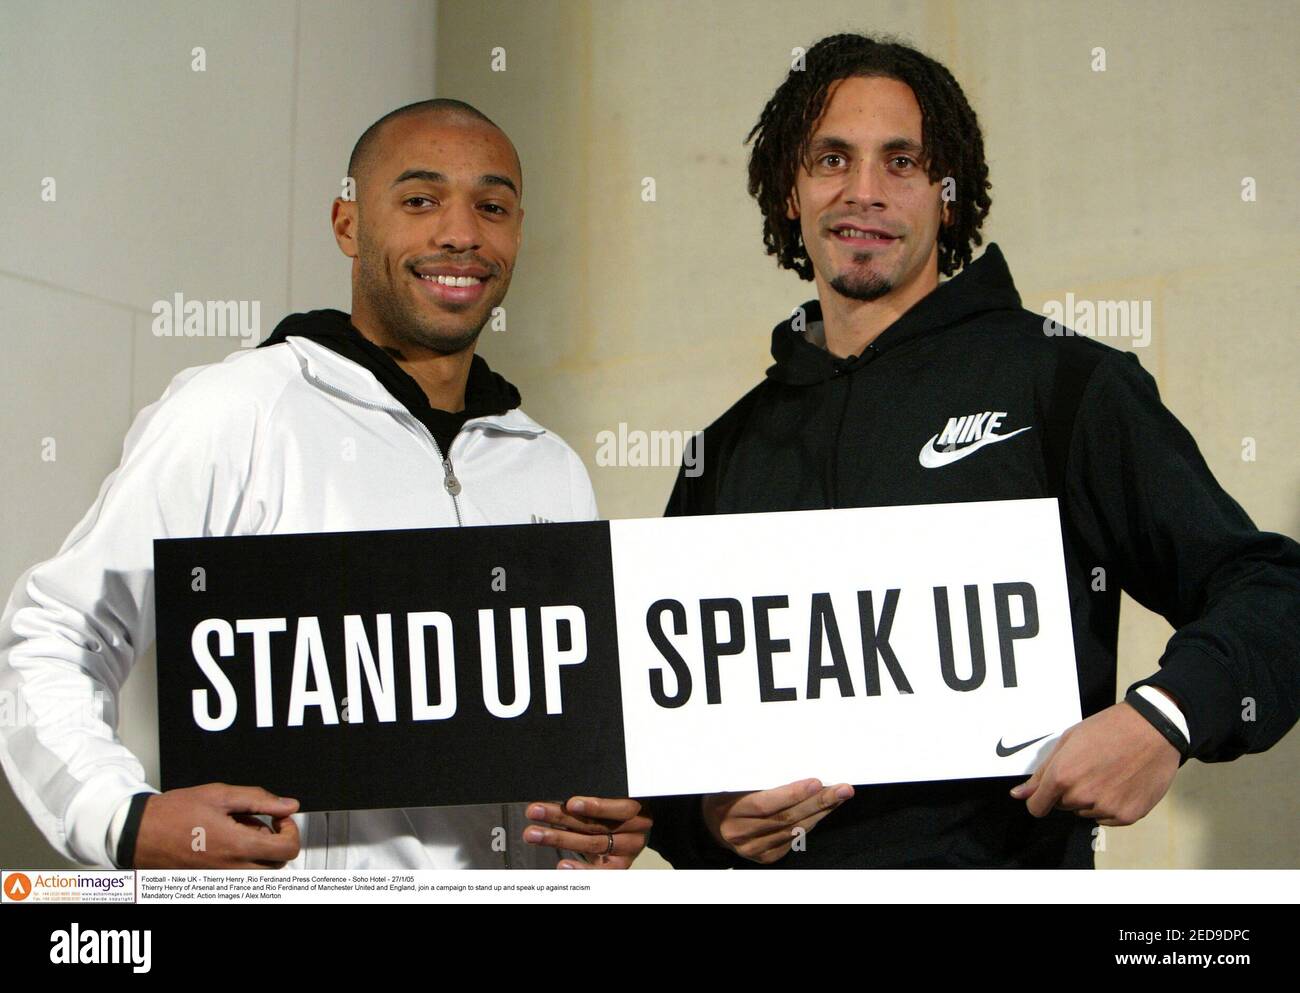 Football - Nike UK - Thierry Henry & Rio Ferdinand Press Conference - Soho  Hotel - 27/1/05 Thierry Henry of Arsenal and France and Rio Ferdinand of  Manchester United and England, join